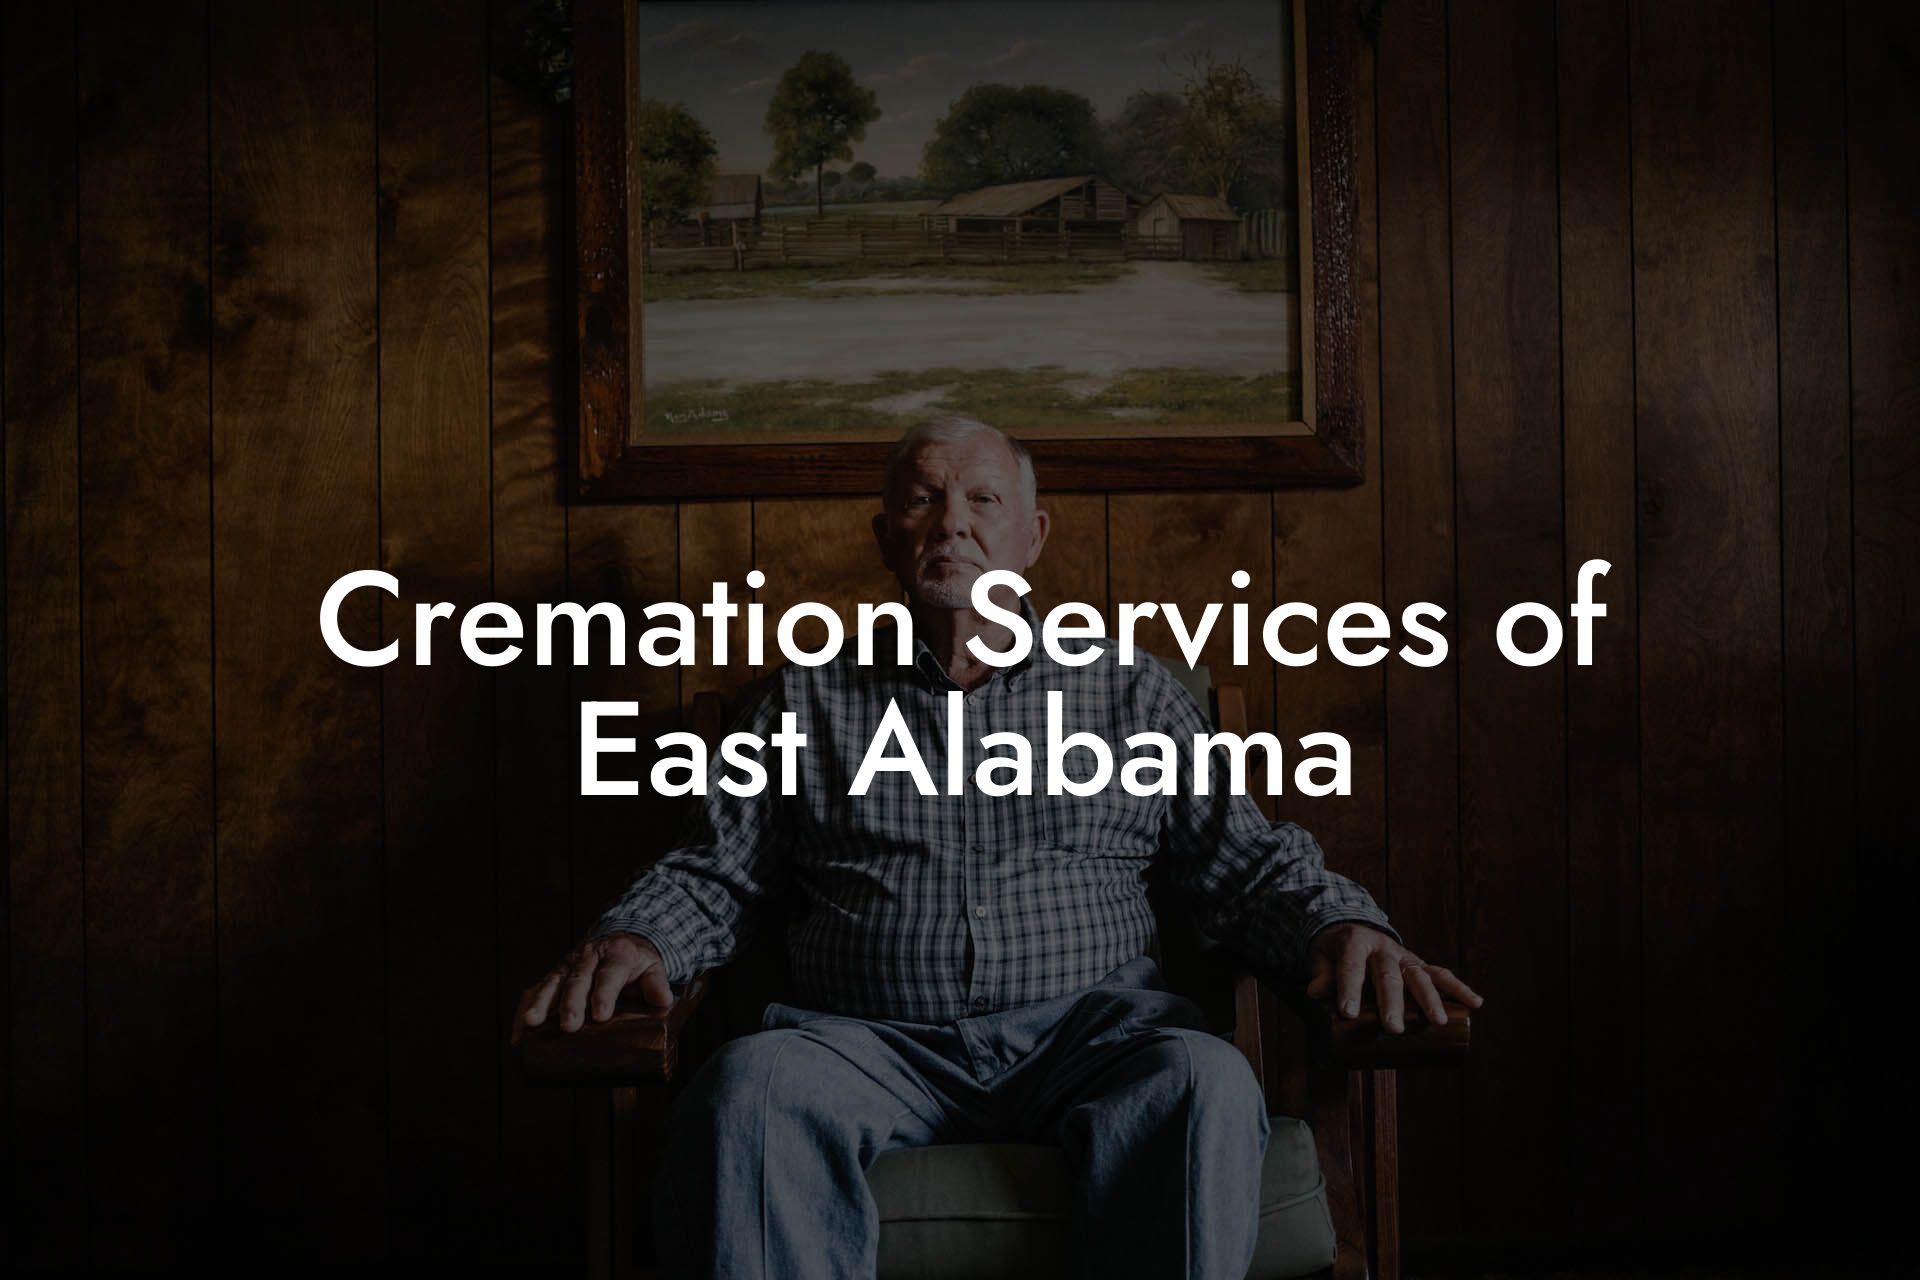 Cremation Services of East Alabama